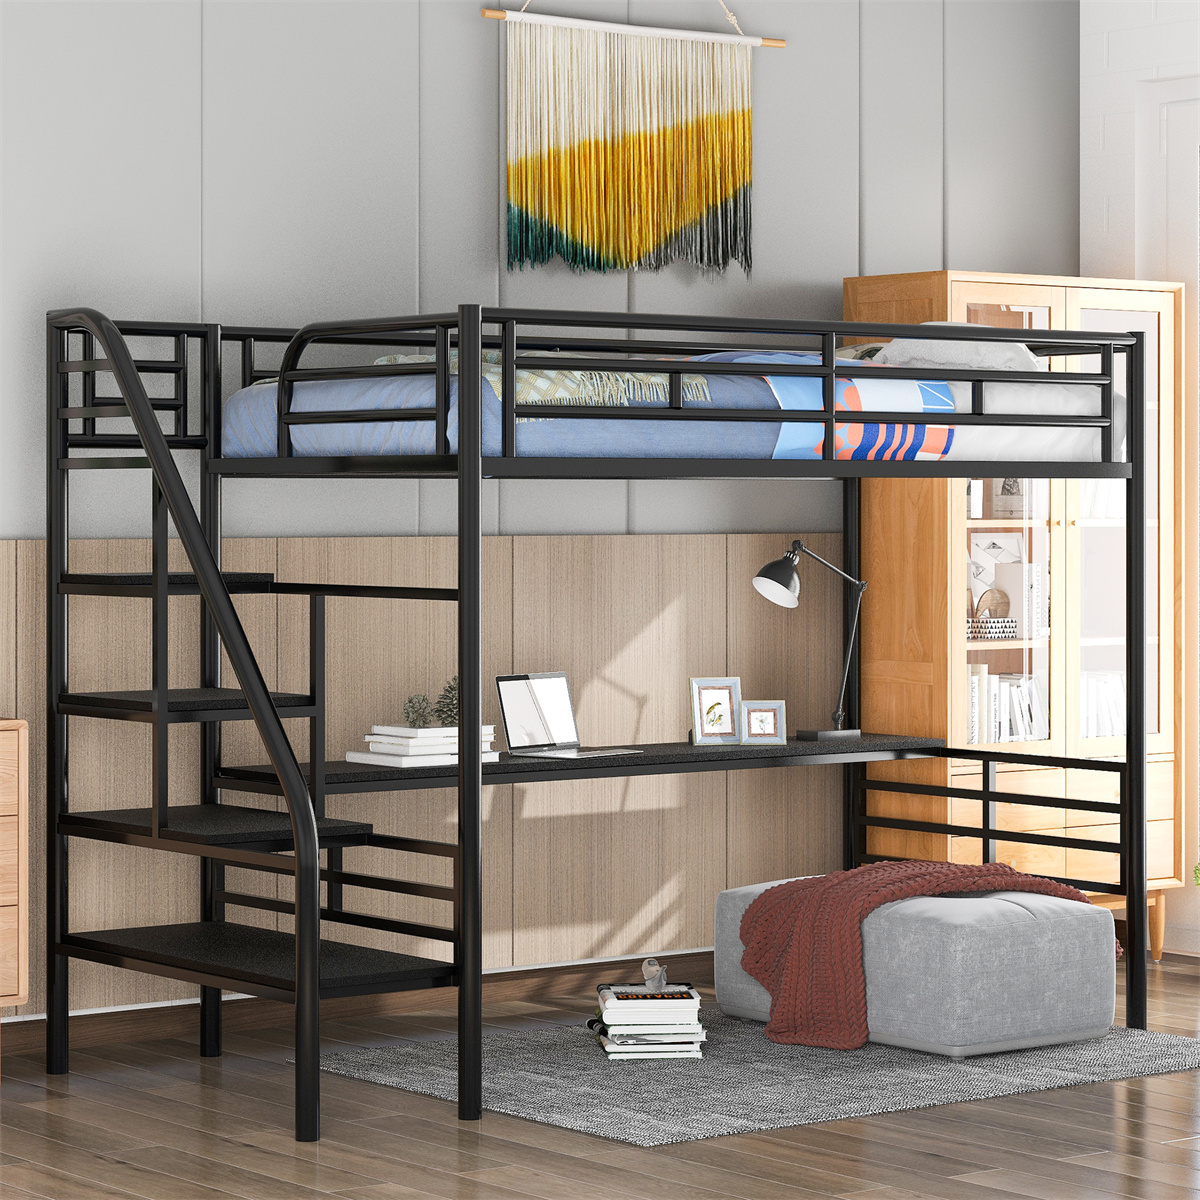 Metal Loft Bed, Twin Size Loft Bed Frame with Desk for Kids Teens Boys Girls, Noise Free Loft Bed with Stairs and Safety Guardrail for Bedroom, Space-Saving Design, No Box Spring Needed, Black - image 1 of 7